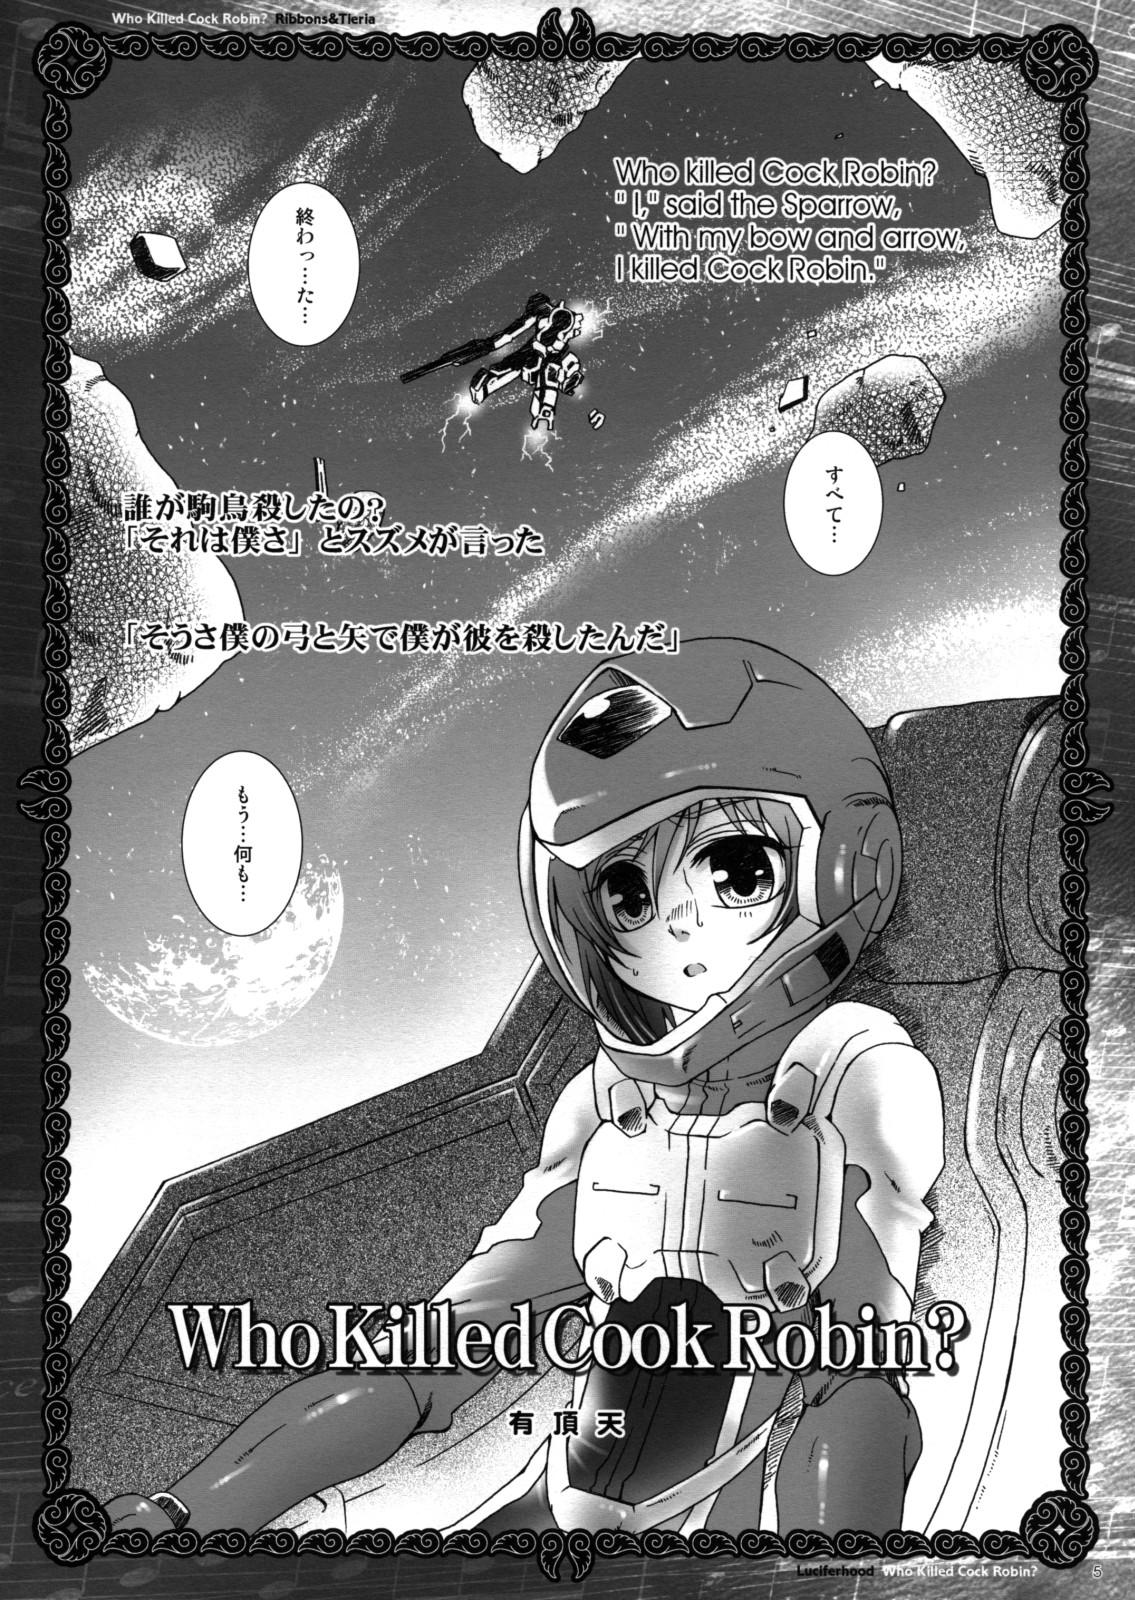 Fuck Who Killed Cock Robin? - Gundam 00 Anale - Page 4